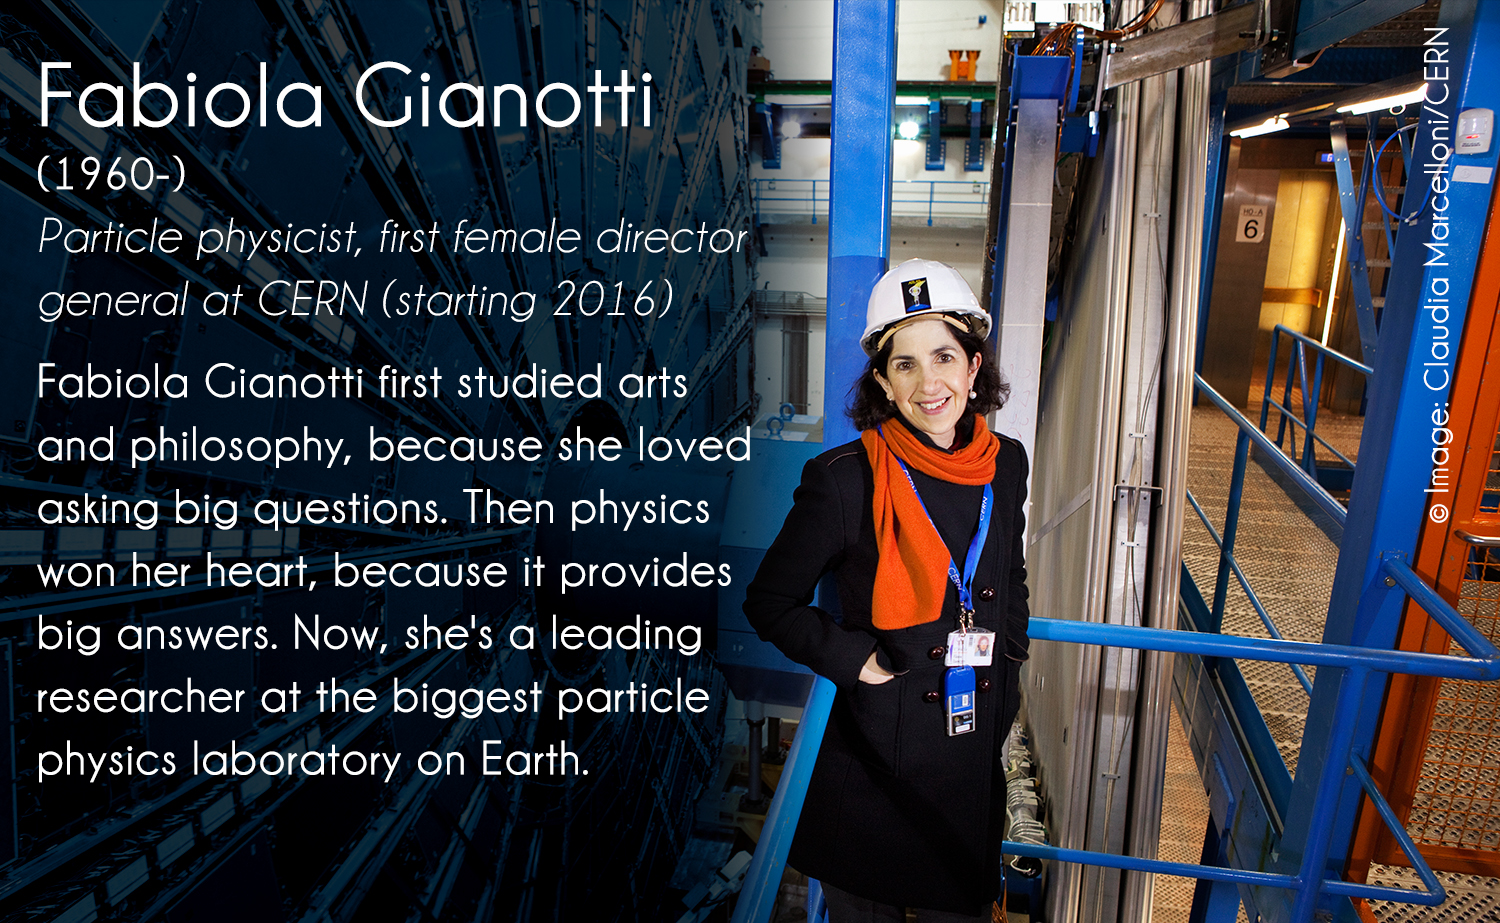 Fabiola Gianotti first studied Art and Philosophy, because she loved asking big questions. Then physics won her heart, because it provides big answers. Now, she's a leading researcher at the biggest particle physics laboratory on Earth.